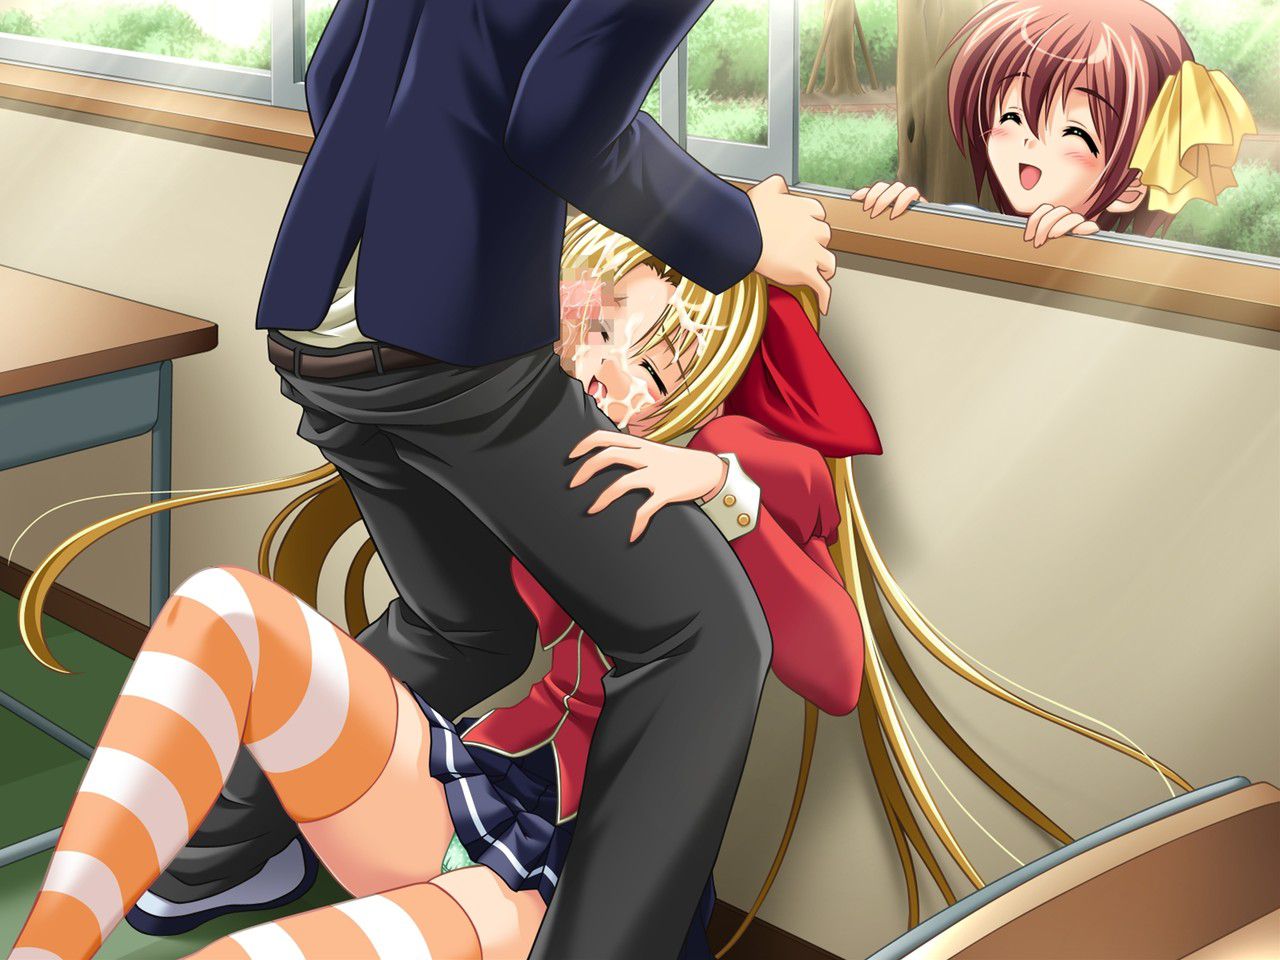 【Erotic Anime Summary】 Erotic image of the excitement level Max doing something hidden and etched 【Secondary erotic】 30